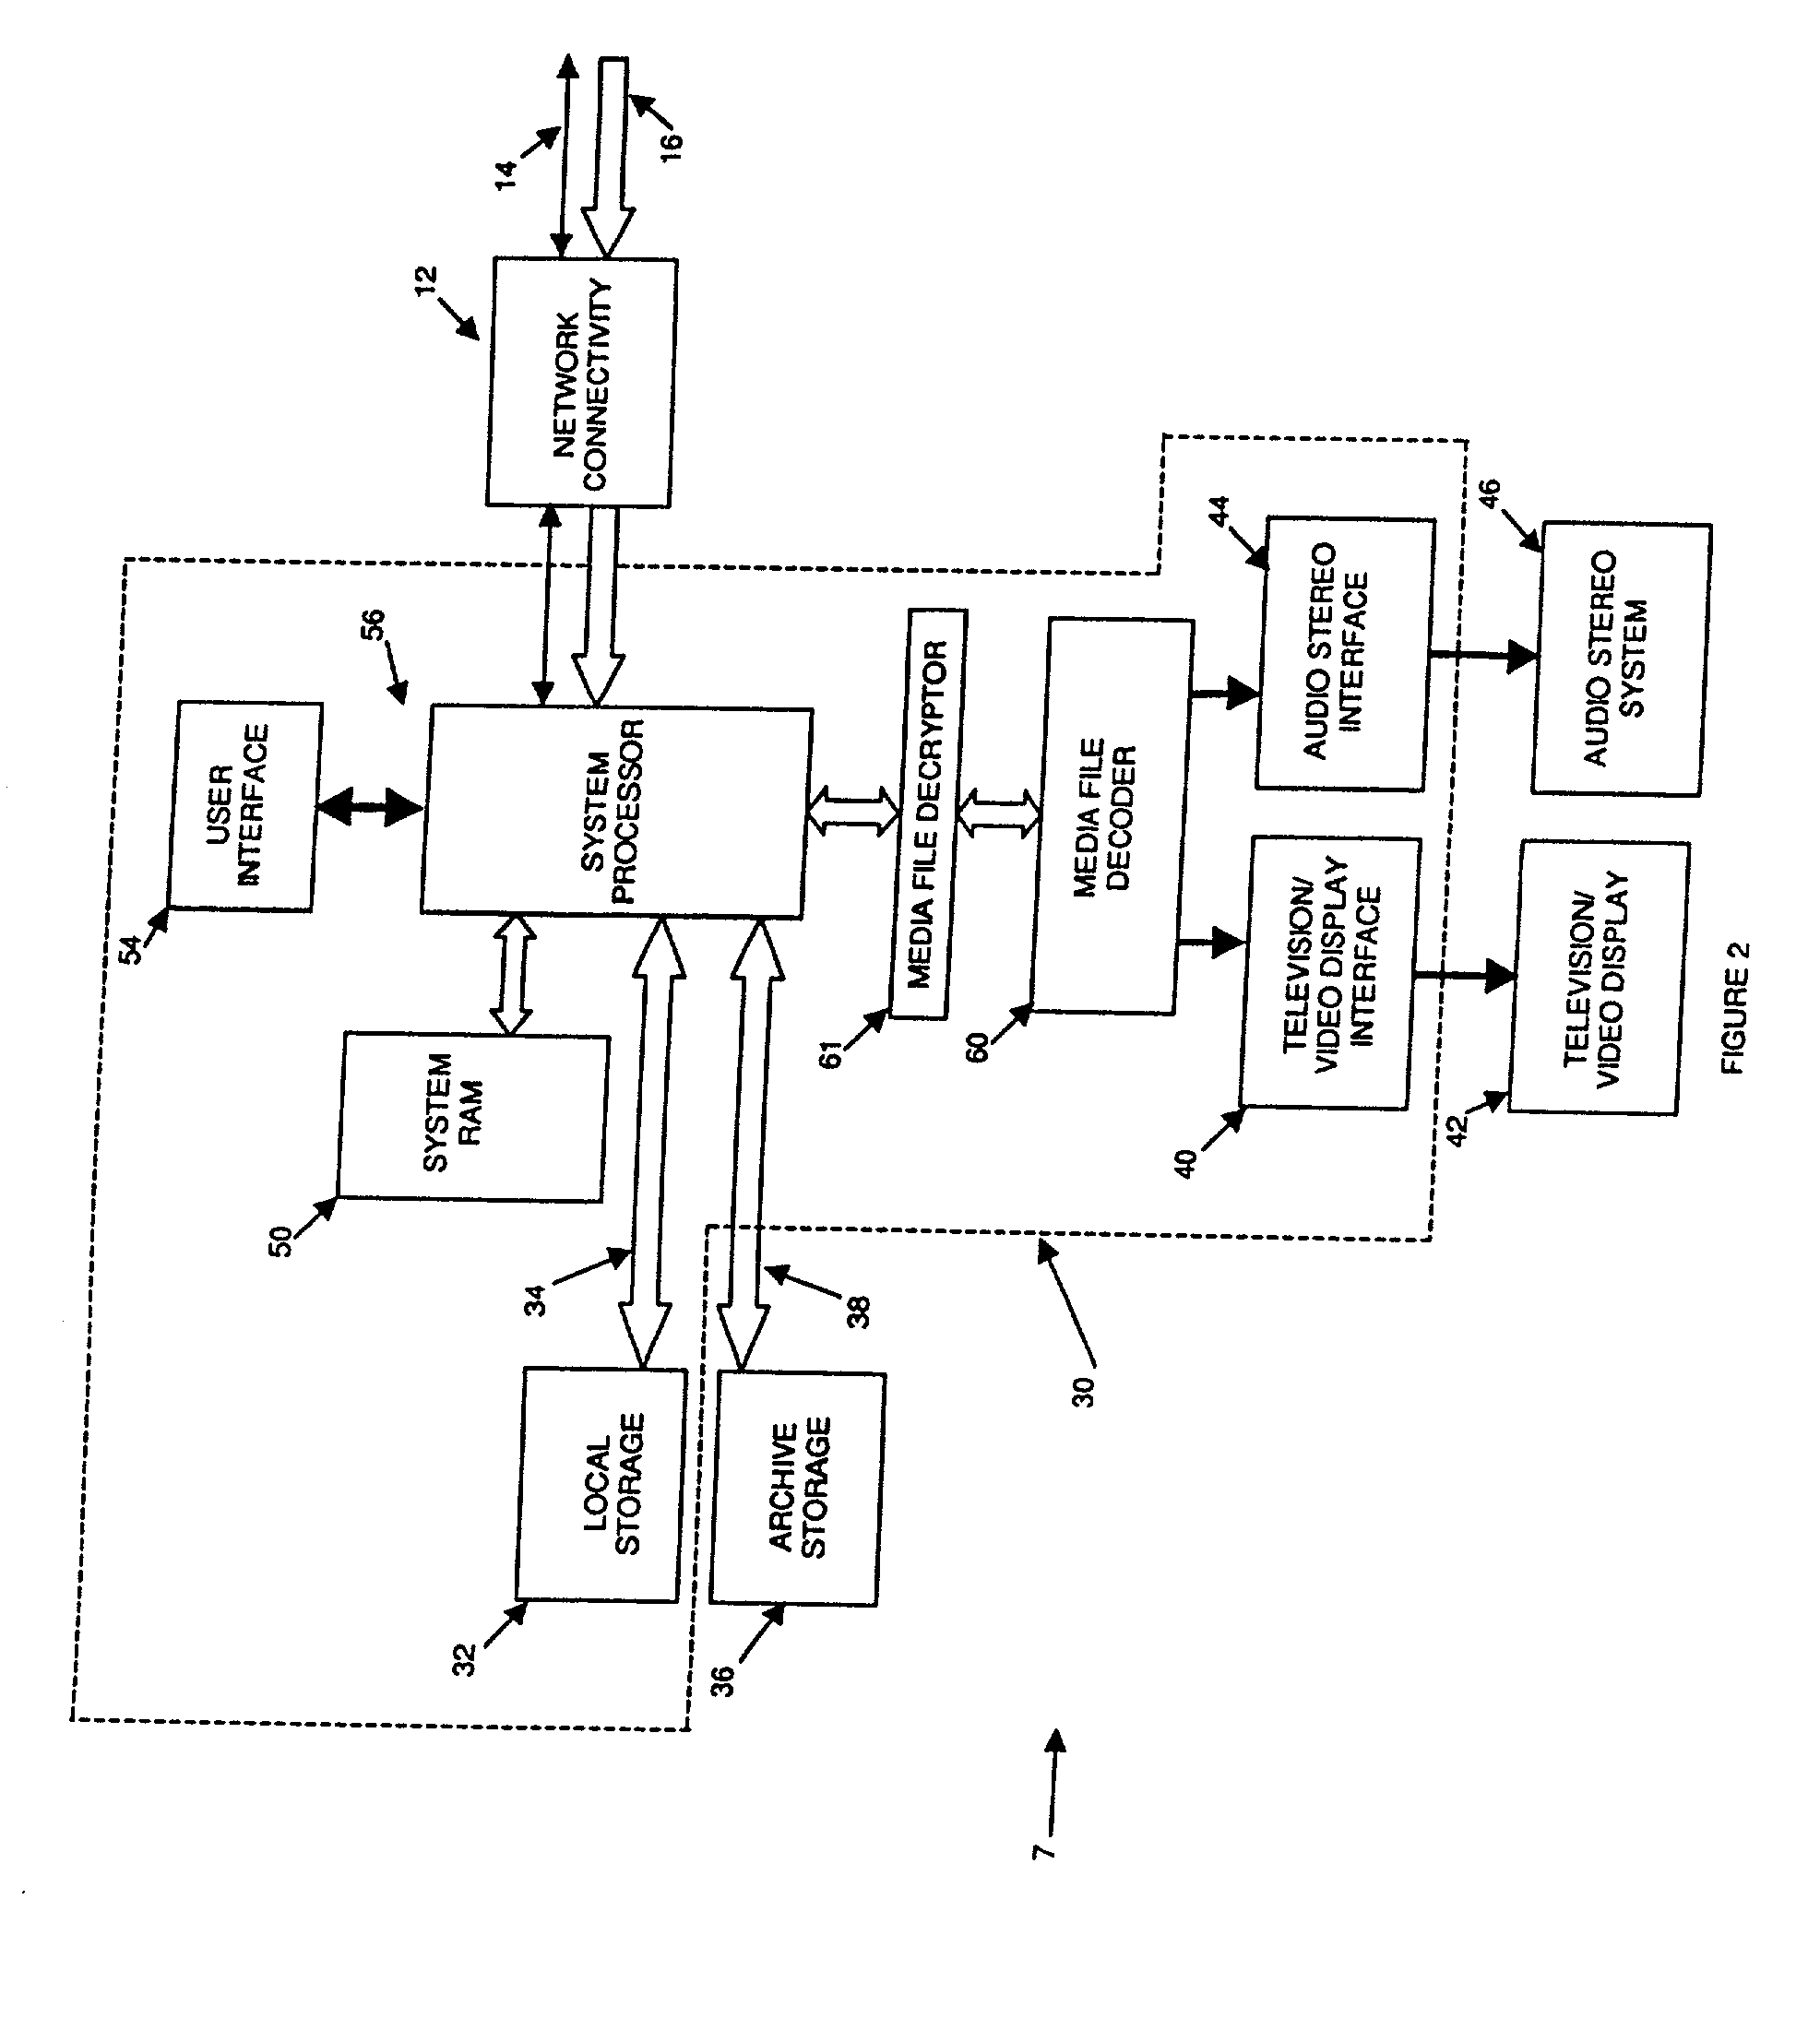 Transaction system for transporting media files from content provider sources to home entertainment devices